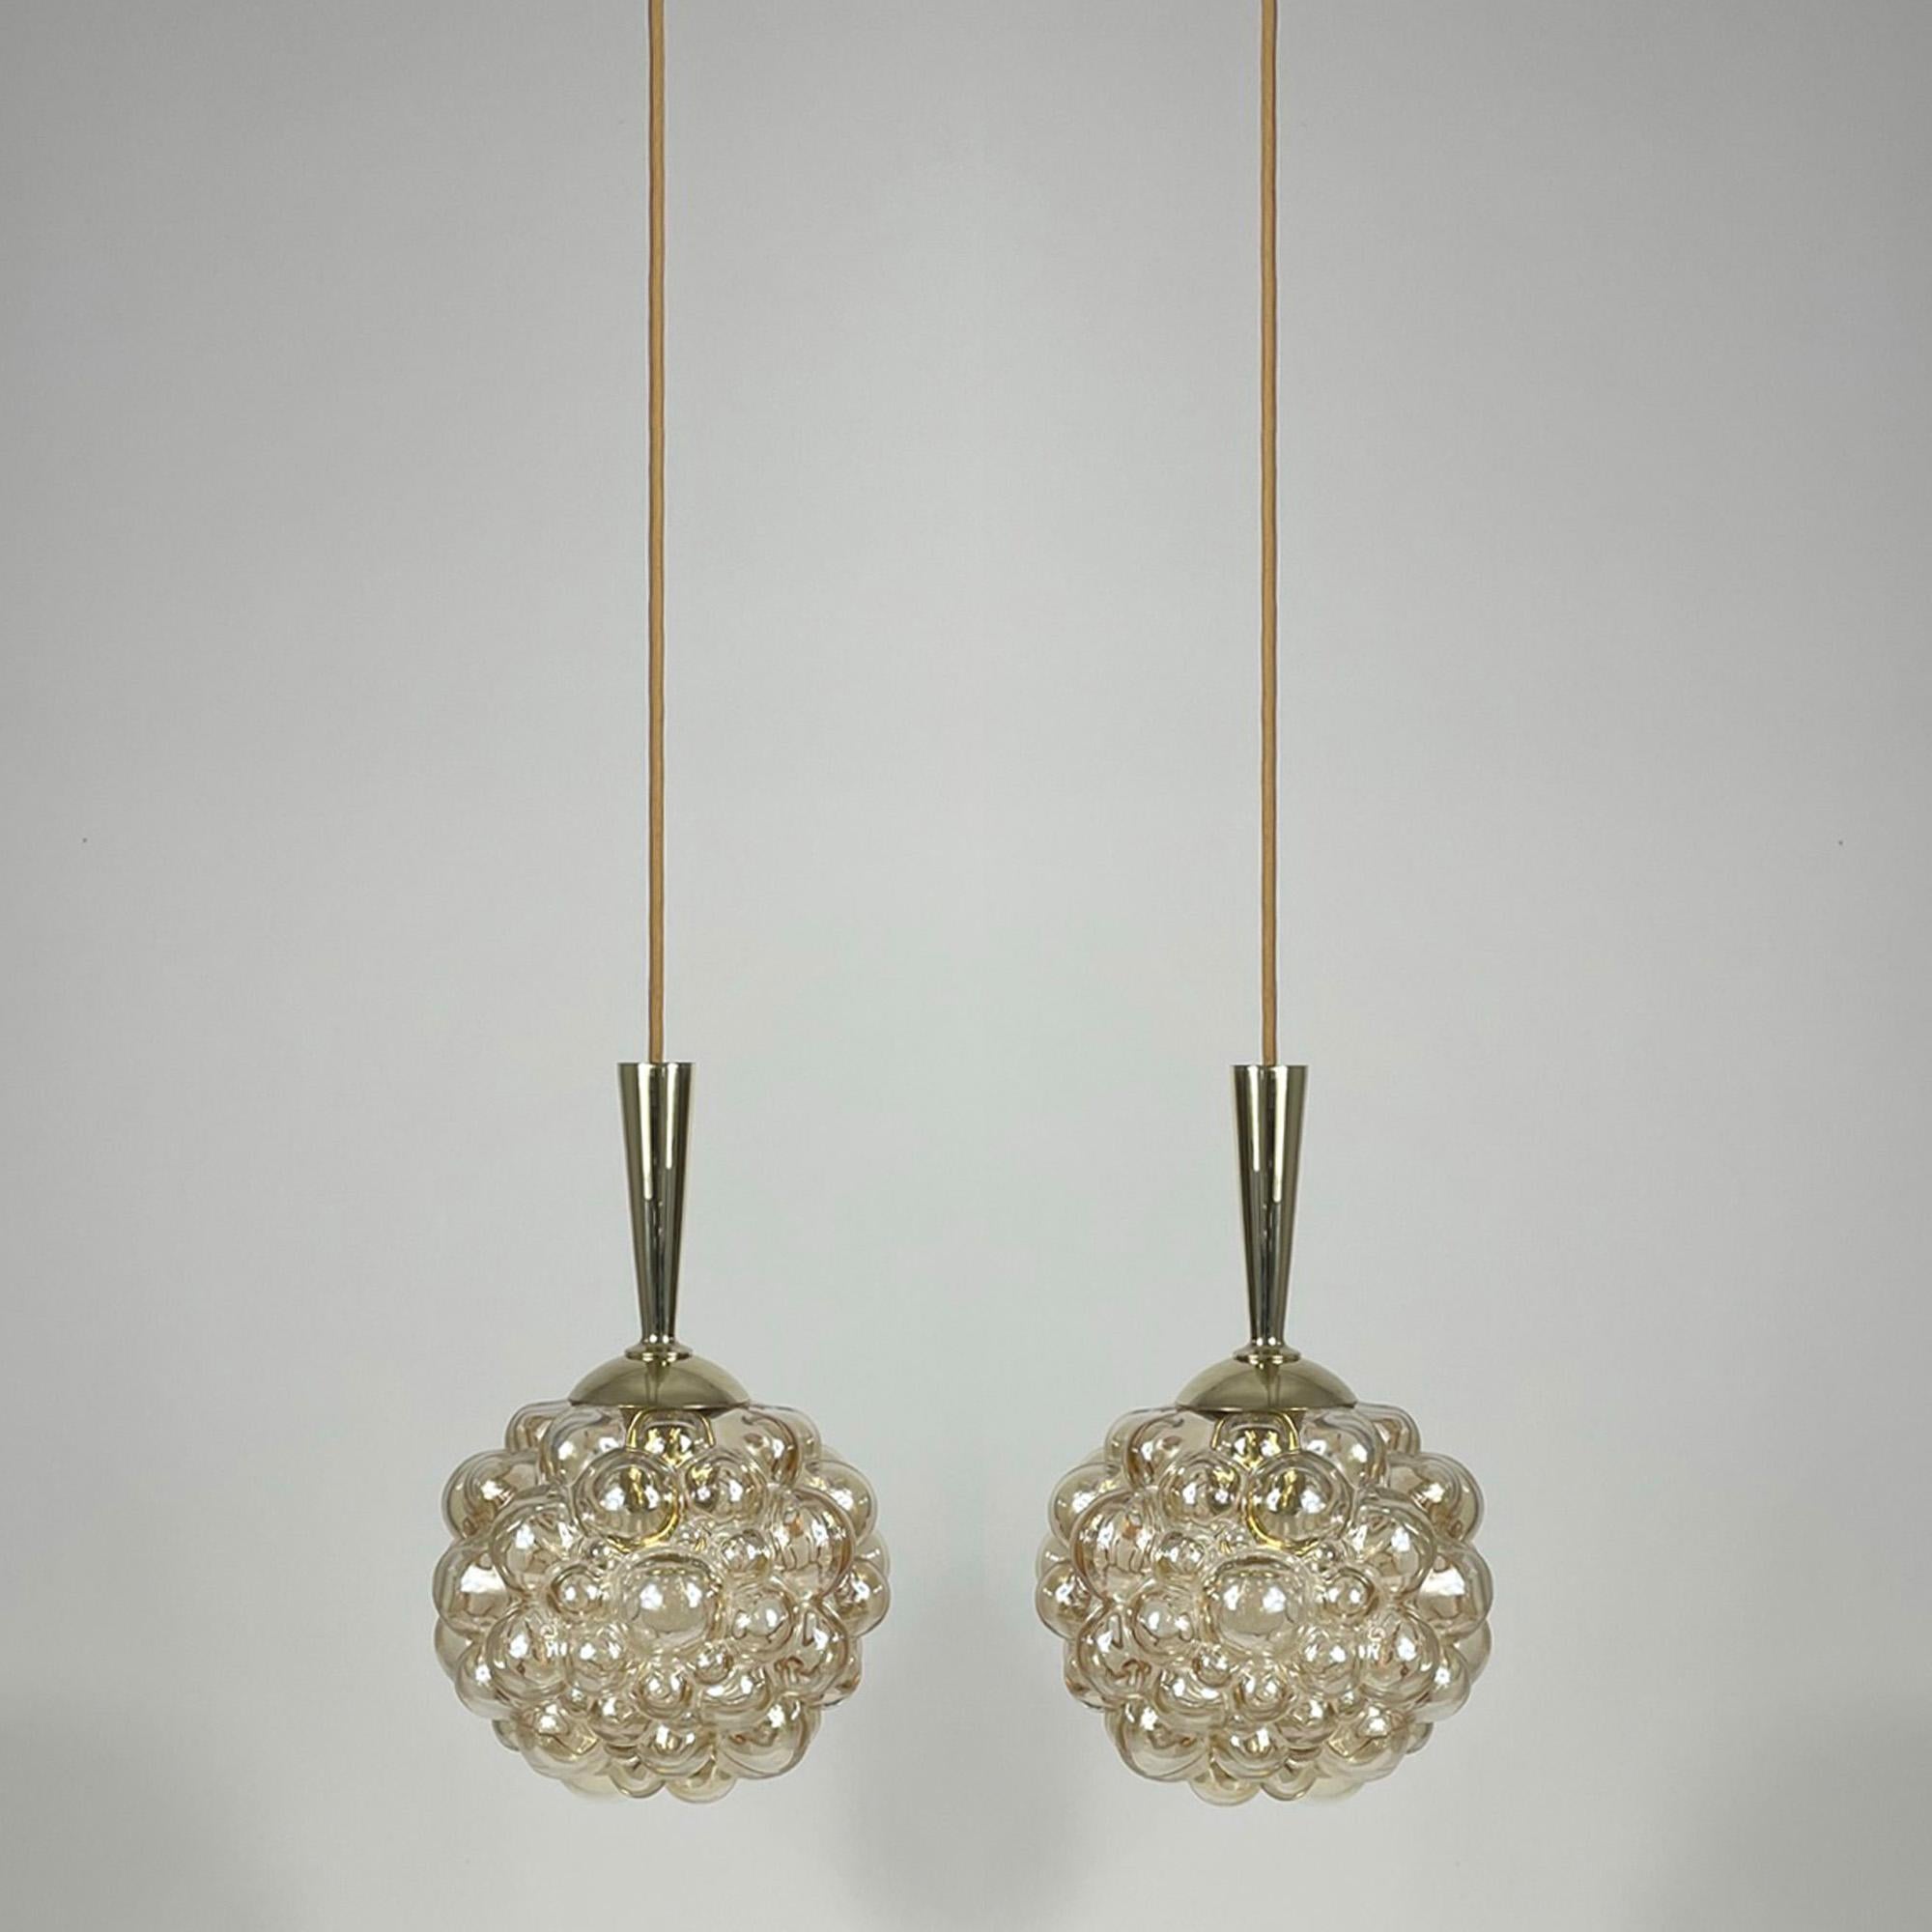 These midcentury Space Age pendant lights were designed during the 1960s by Helena Tynell and Heinrich Gantenbrink and manufactured by Glashuette Limburg in Germany. They feature amber bubble glass lampshades with a glossy finish and brass hardware.